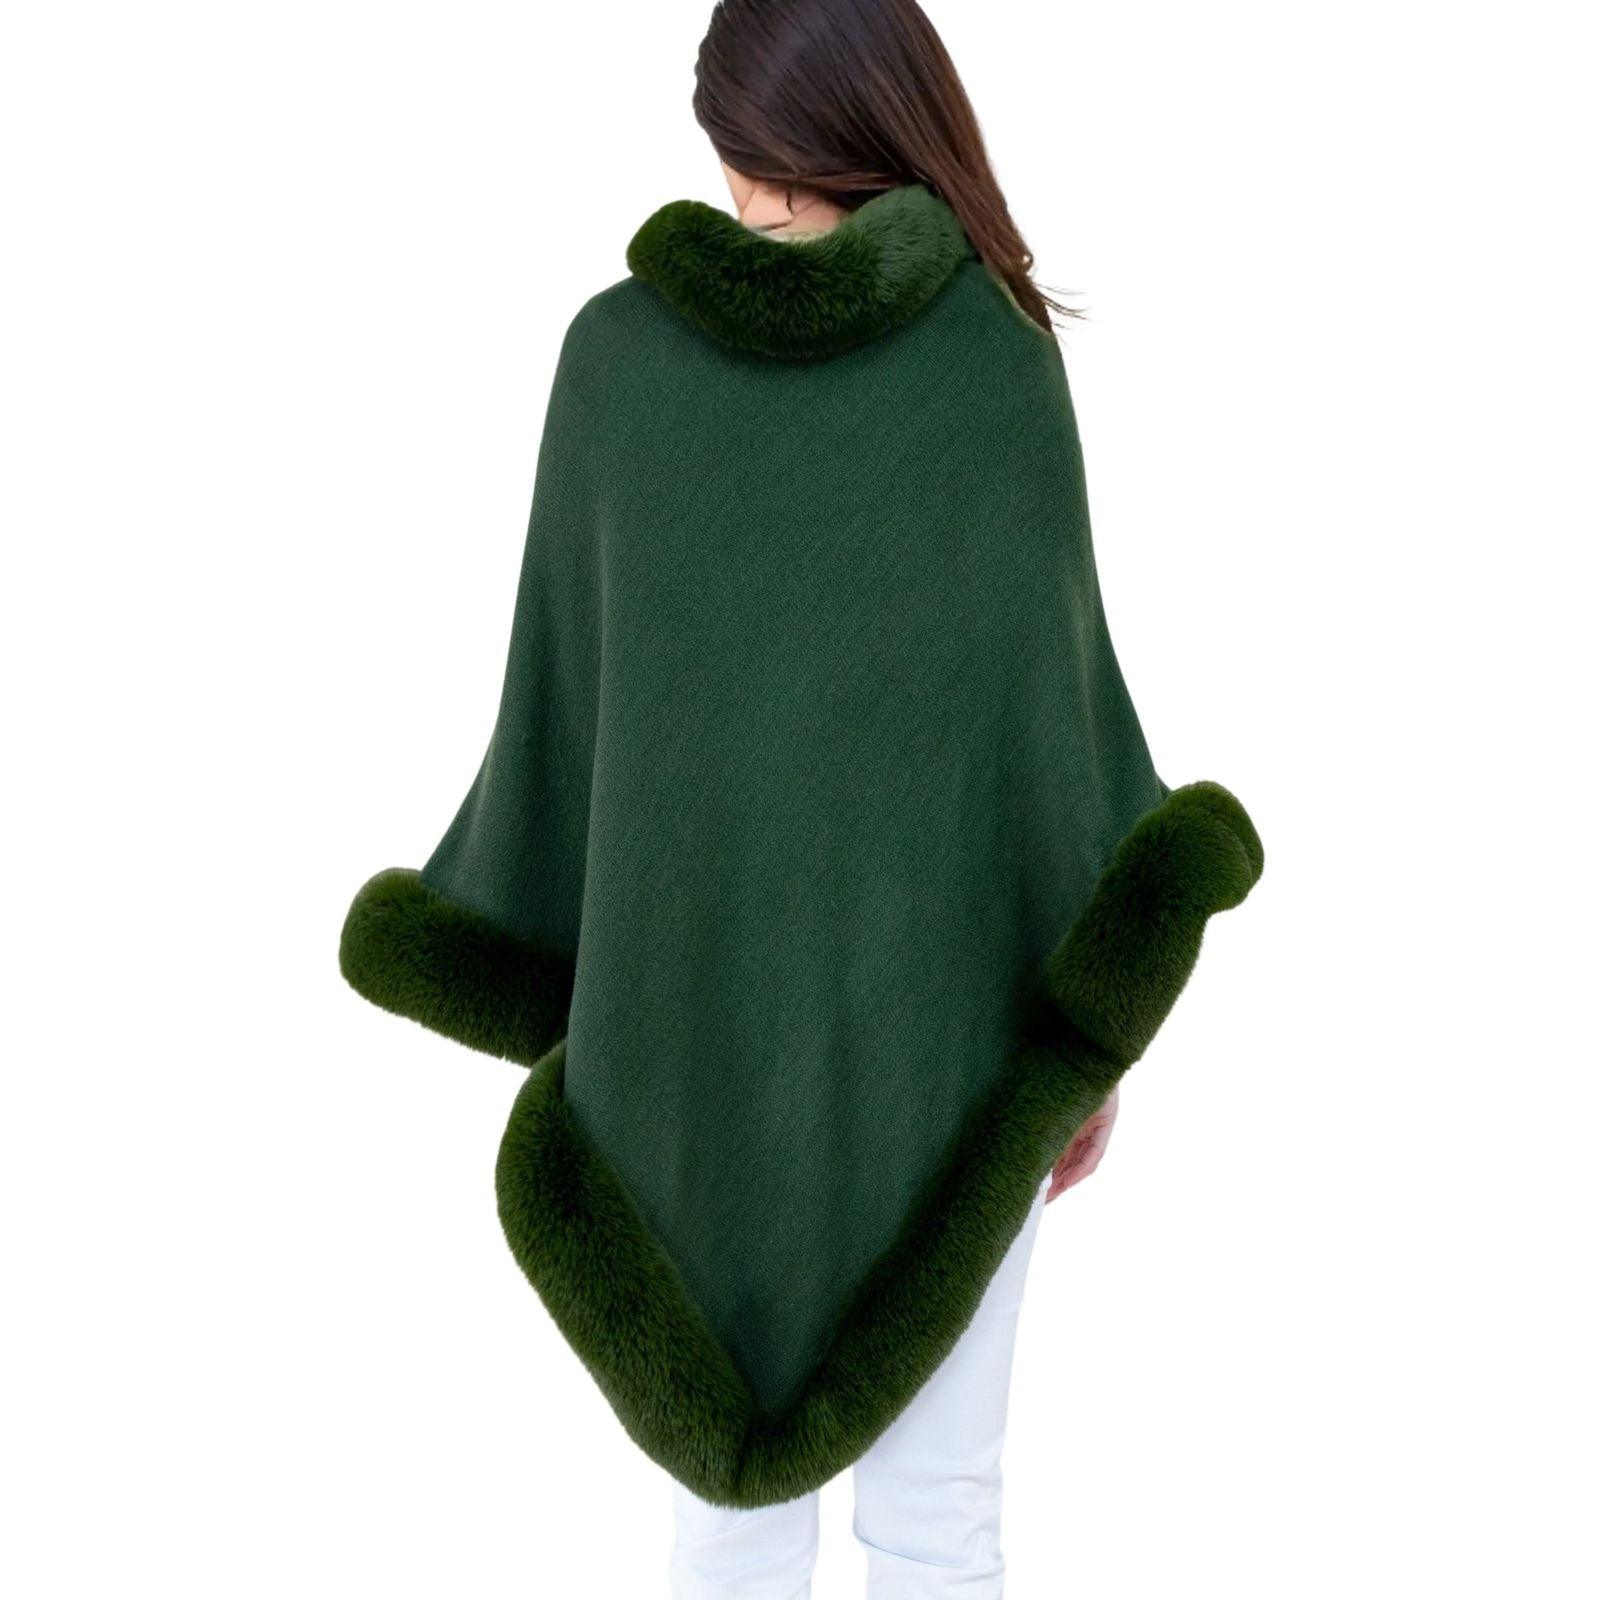 Luxurious & Stylish: Olive-green Poncho with Faux Fur Trim for Women